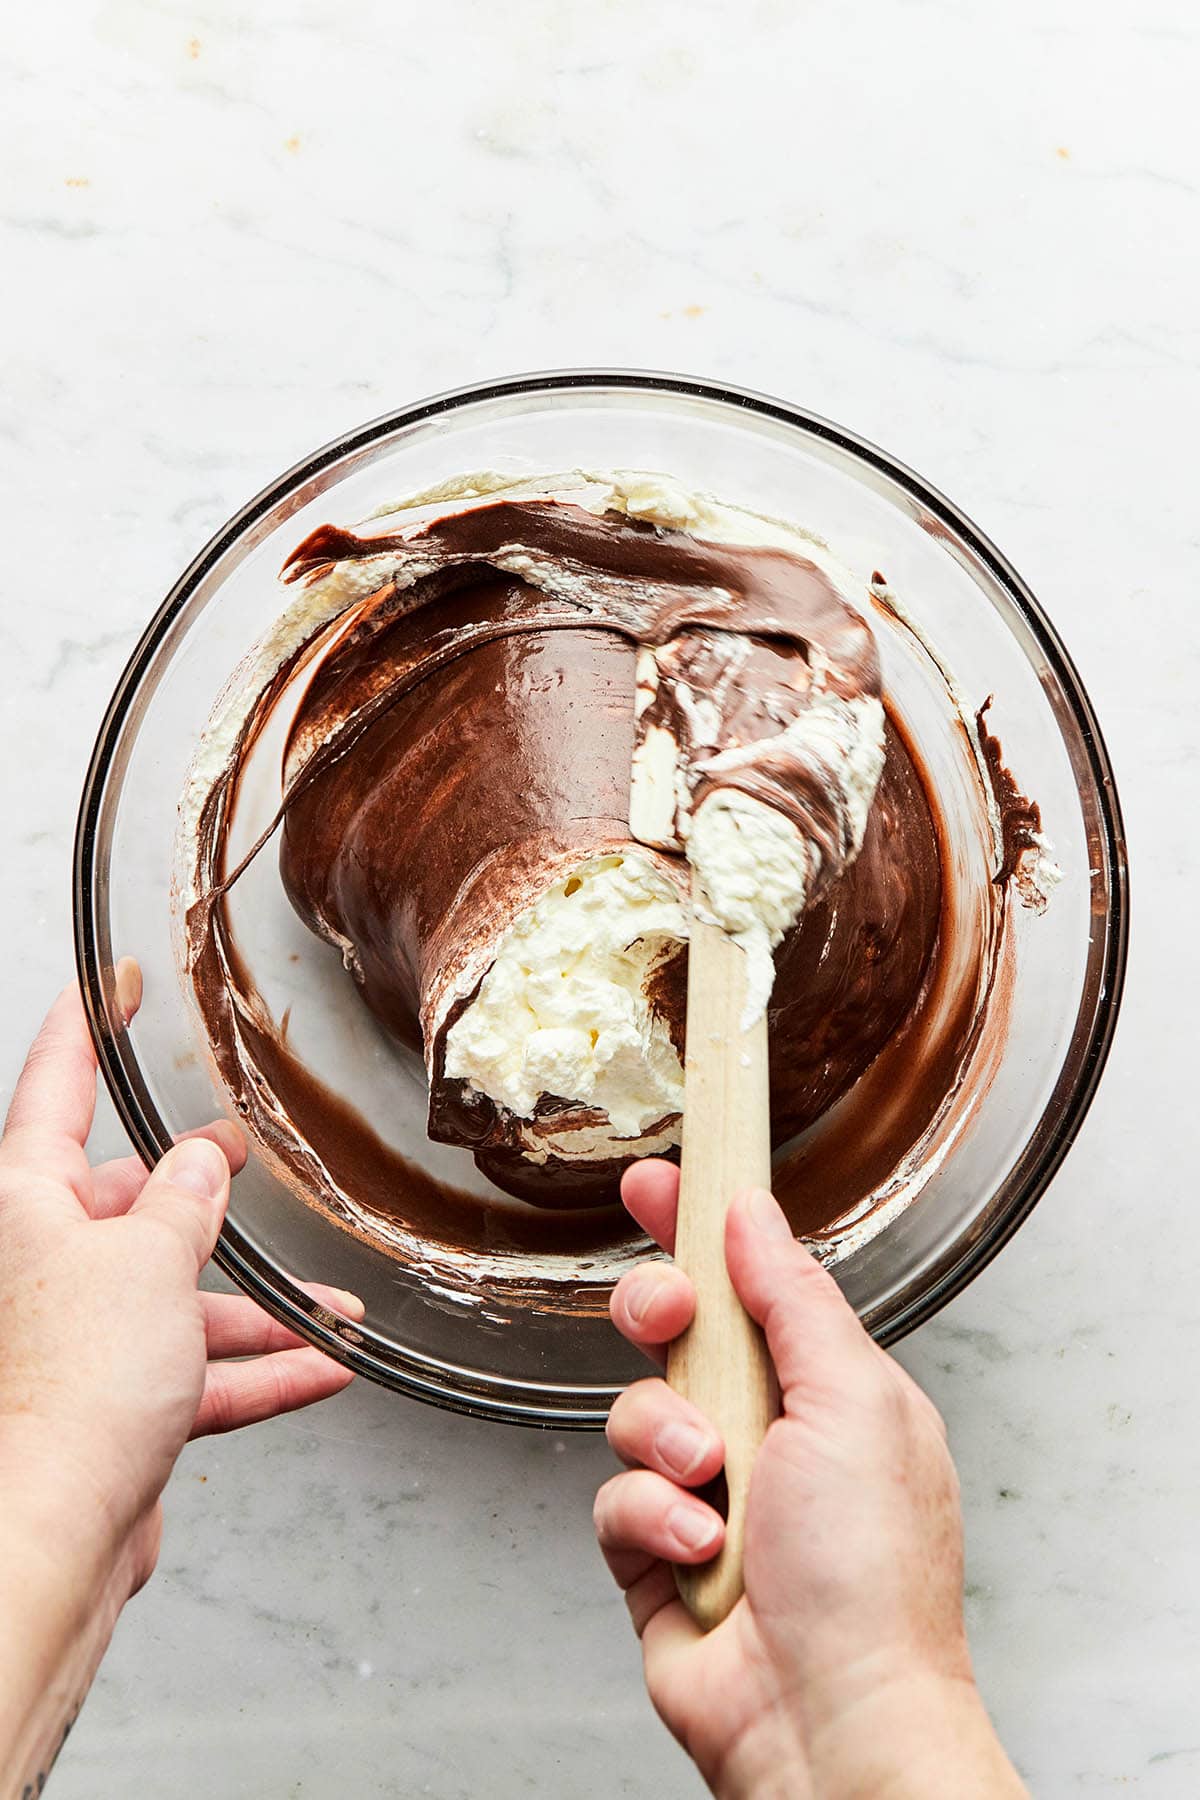 A hand using a rubber spatula to fold whipped cream into chocolate batter.